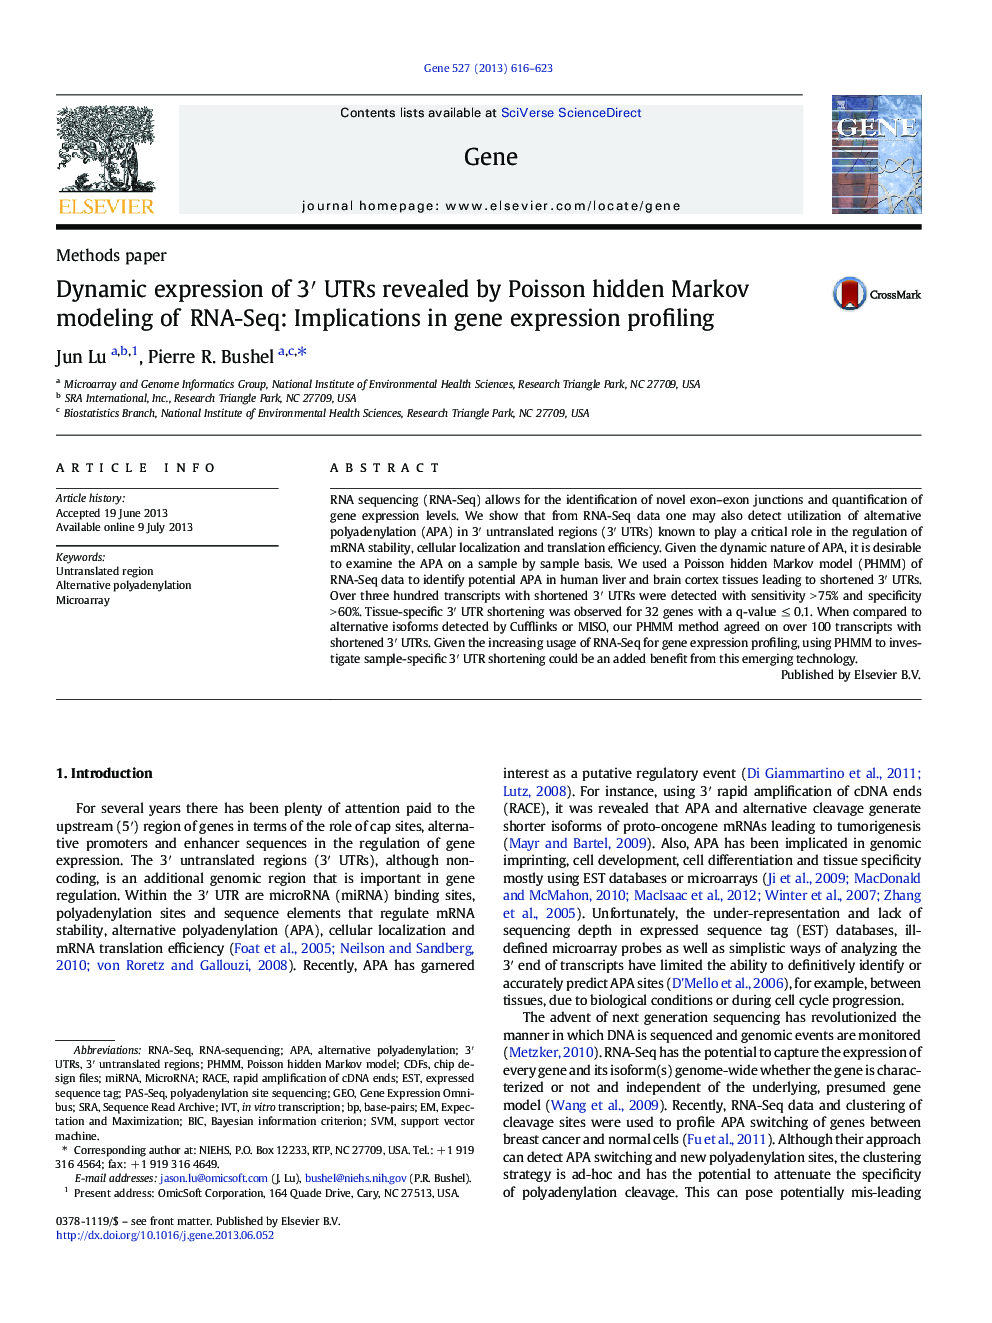 Dynamic expression of 3′ UTRs revealed by Poisson hidden Markov modeling of RNA-Seq: Implications in gene expression profiling